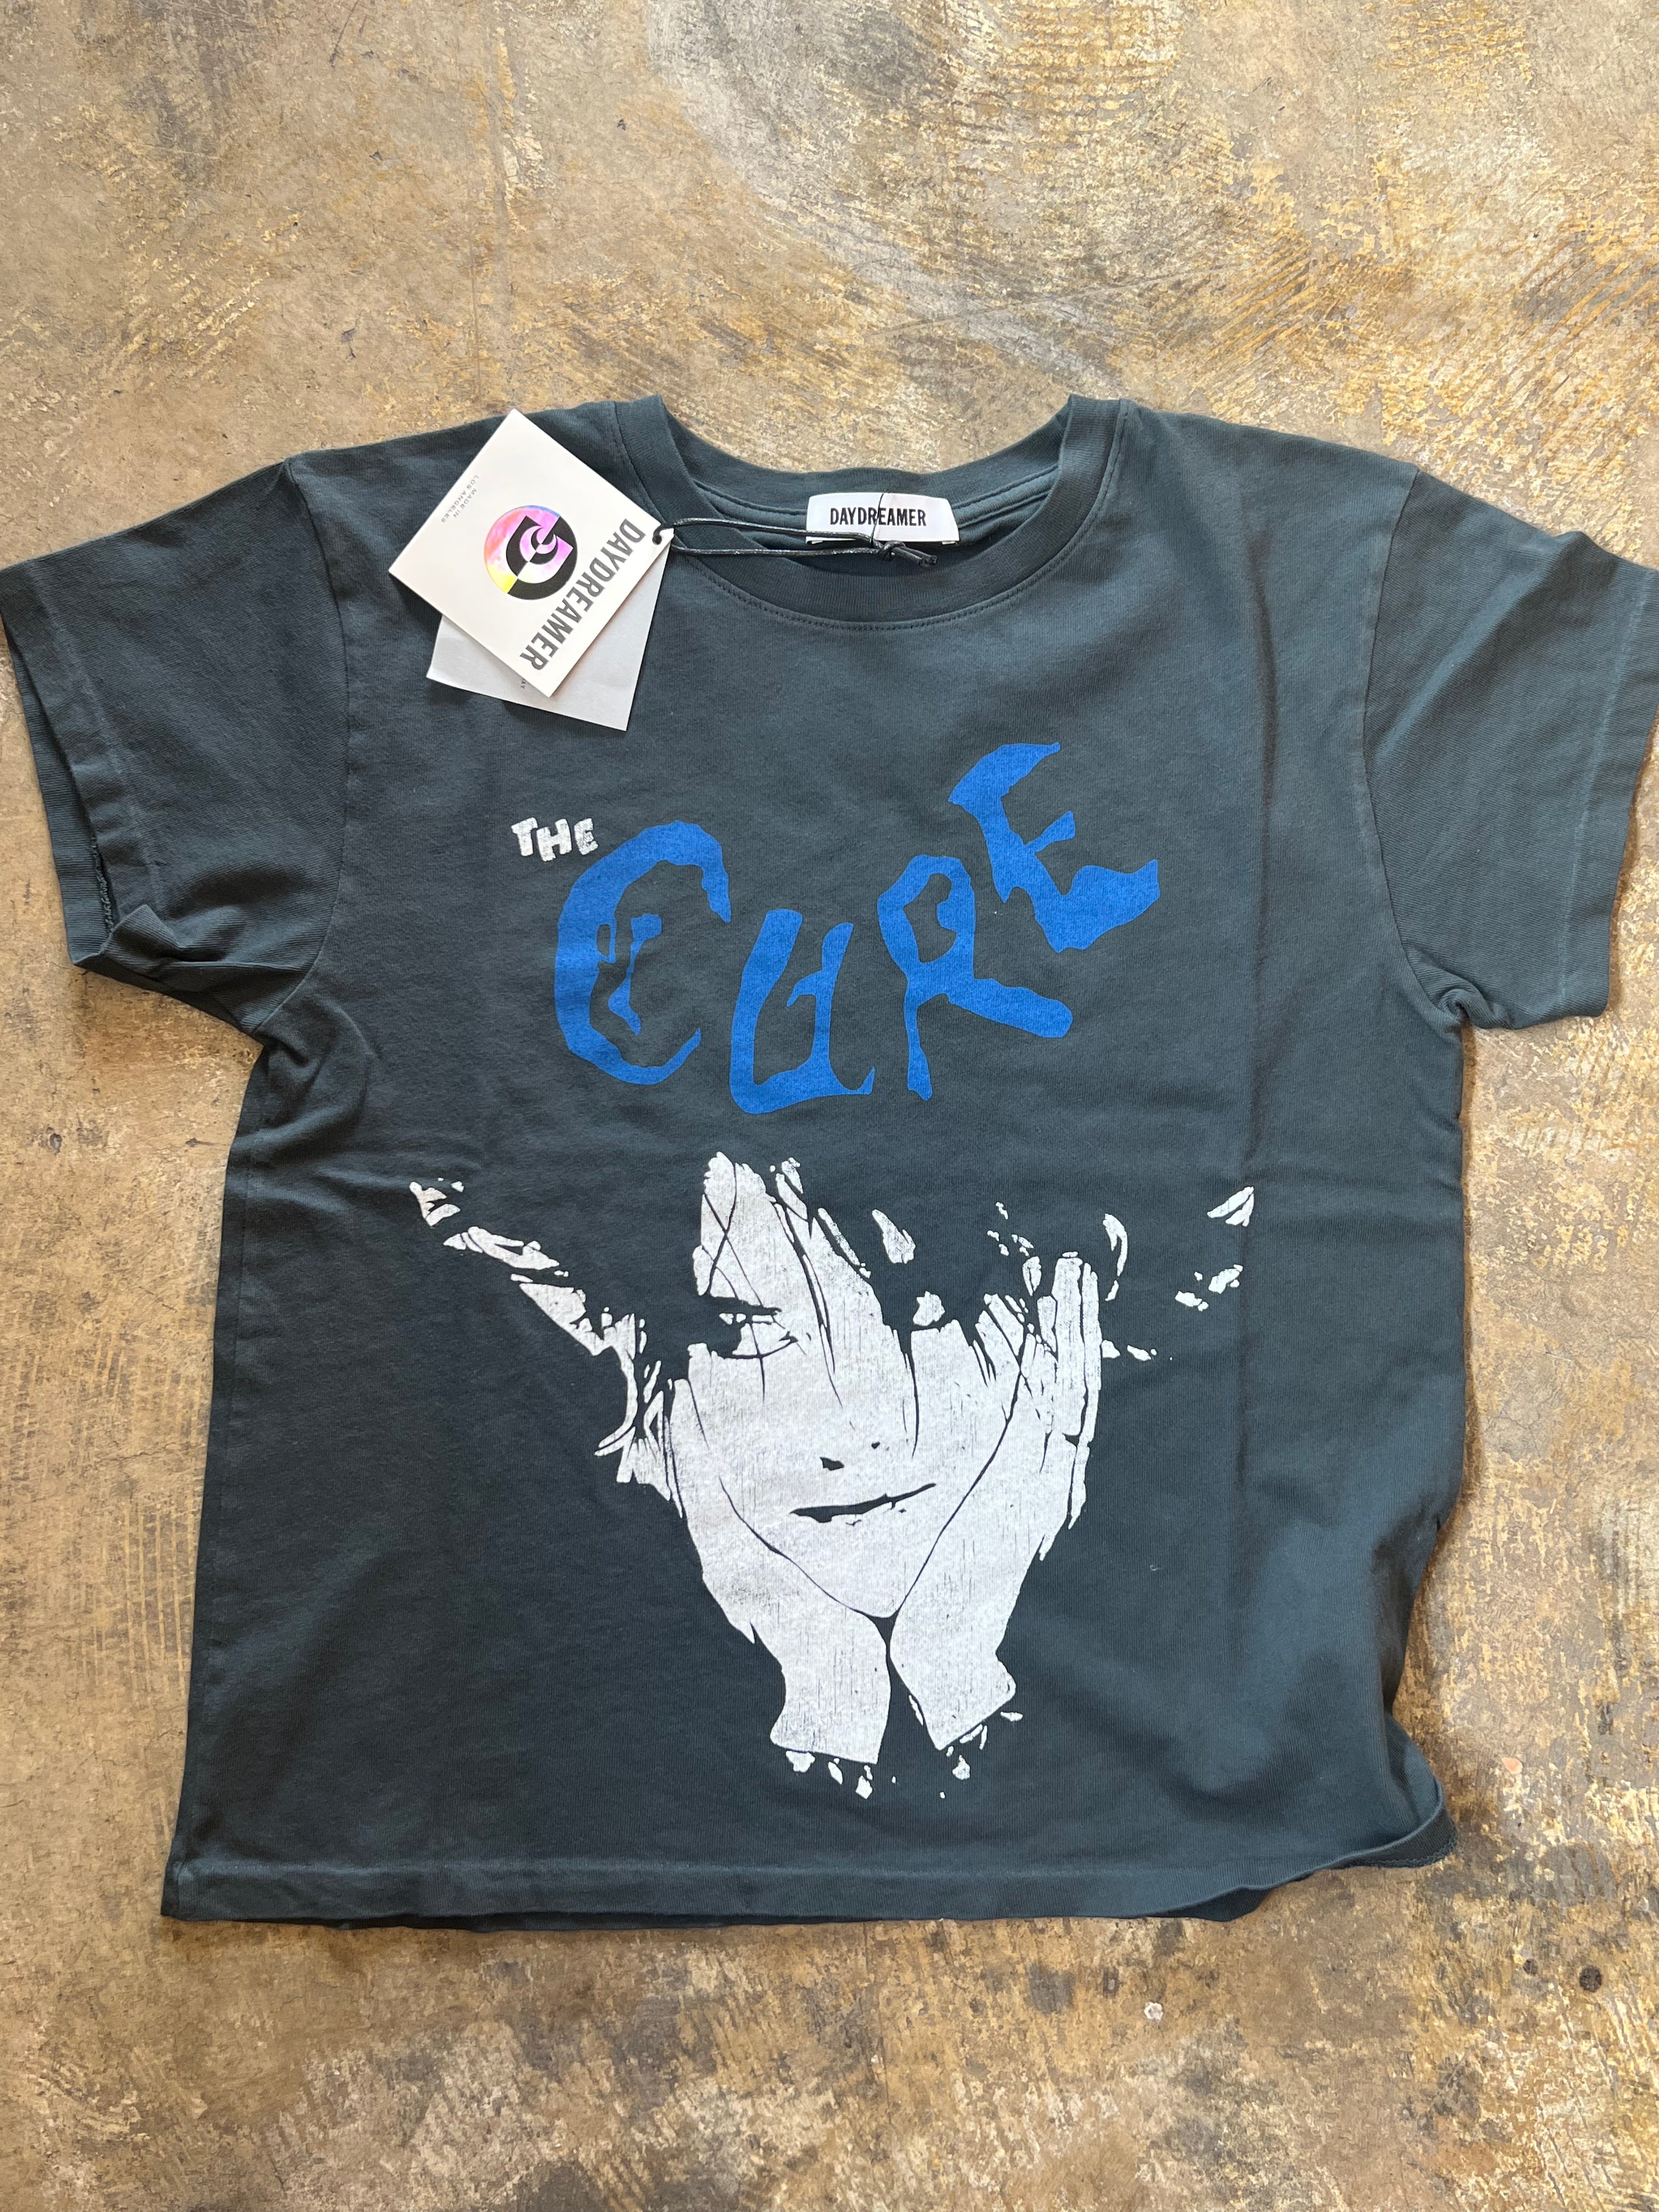 The Cure Close to Me Tour Tee